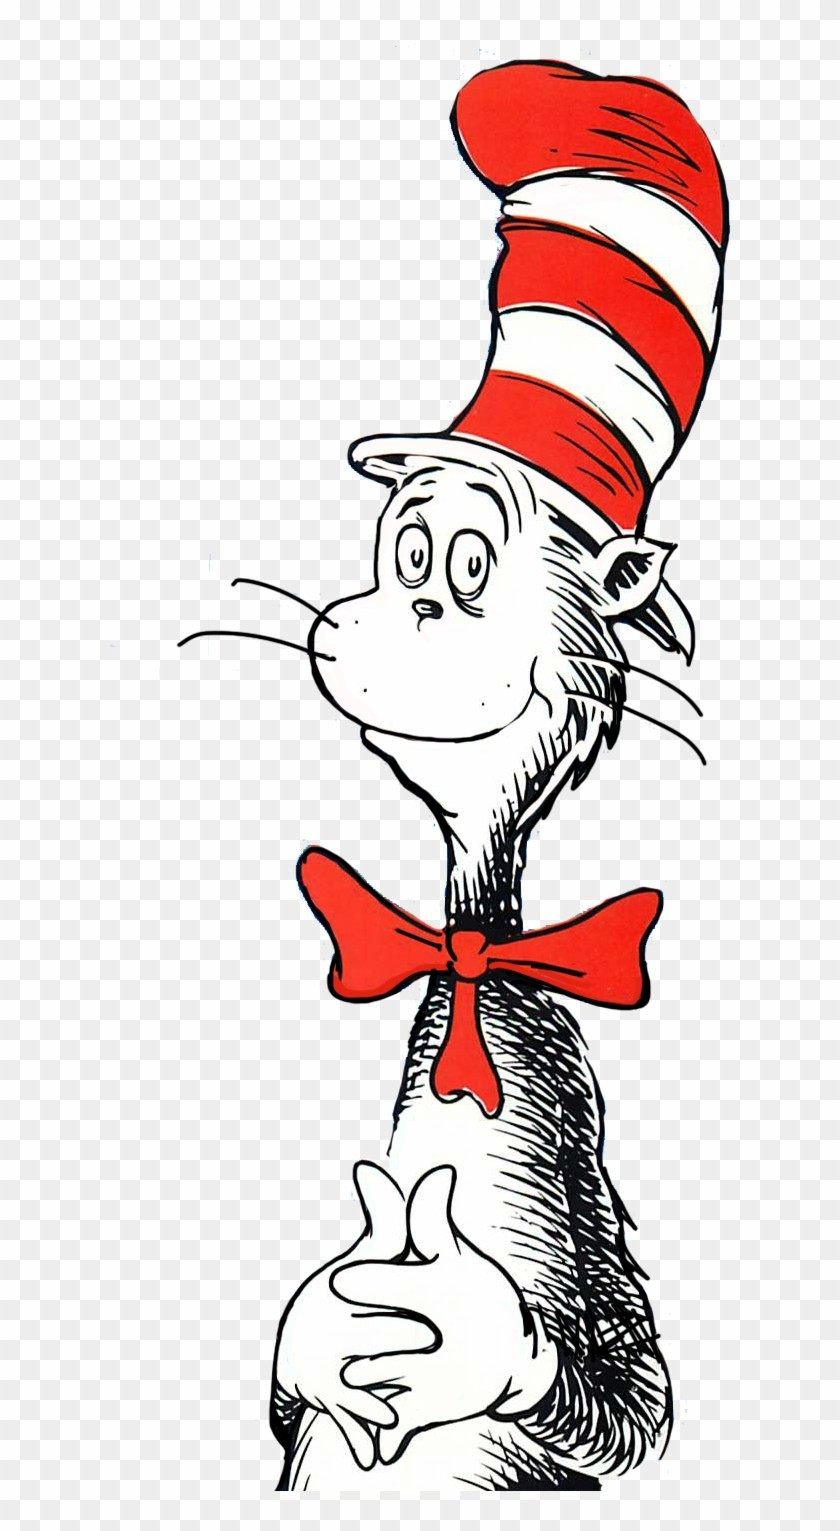 Dr. Seuss Clipart for printable to.